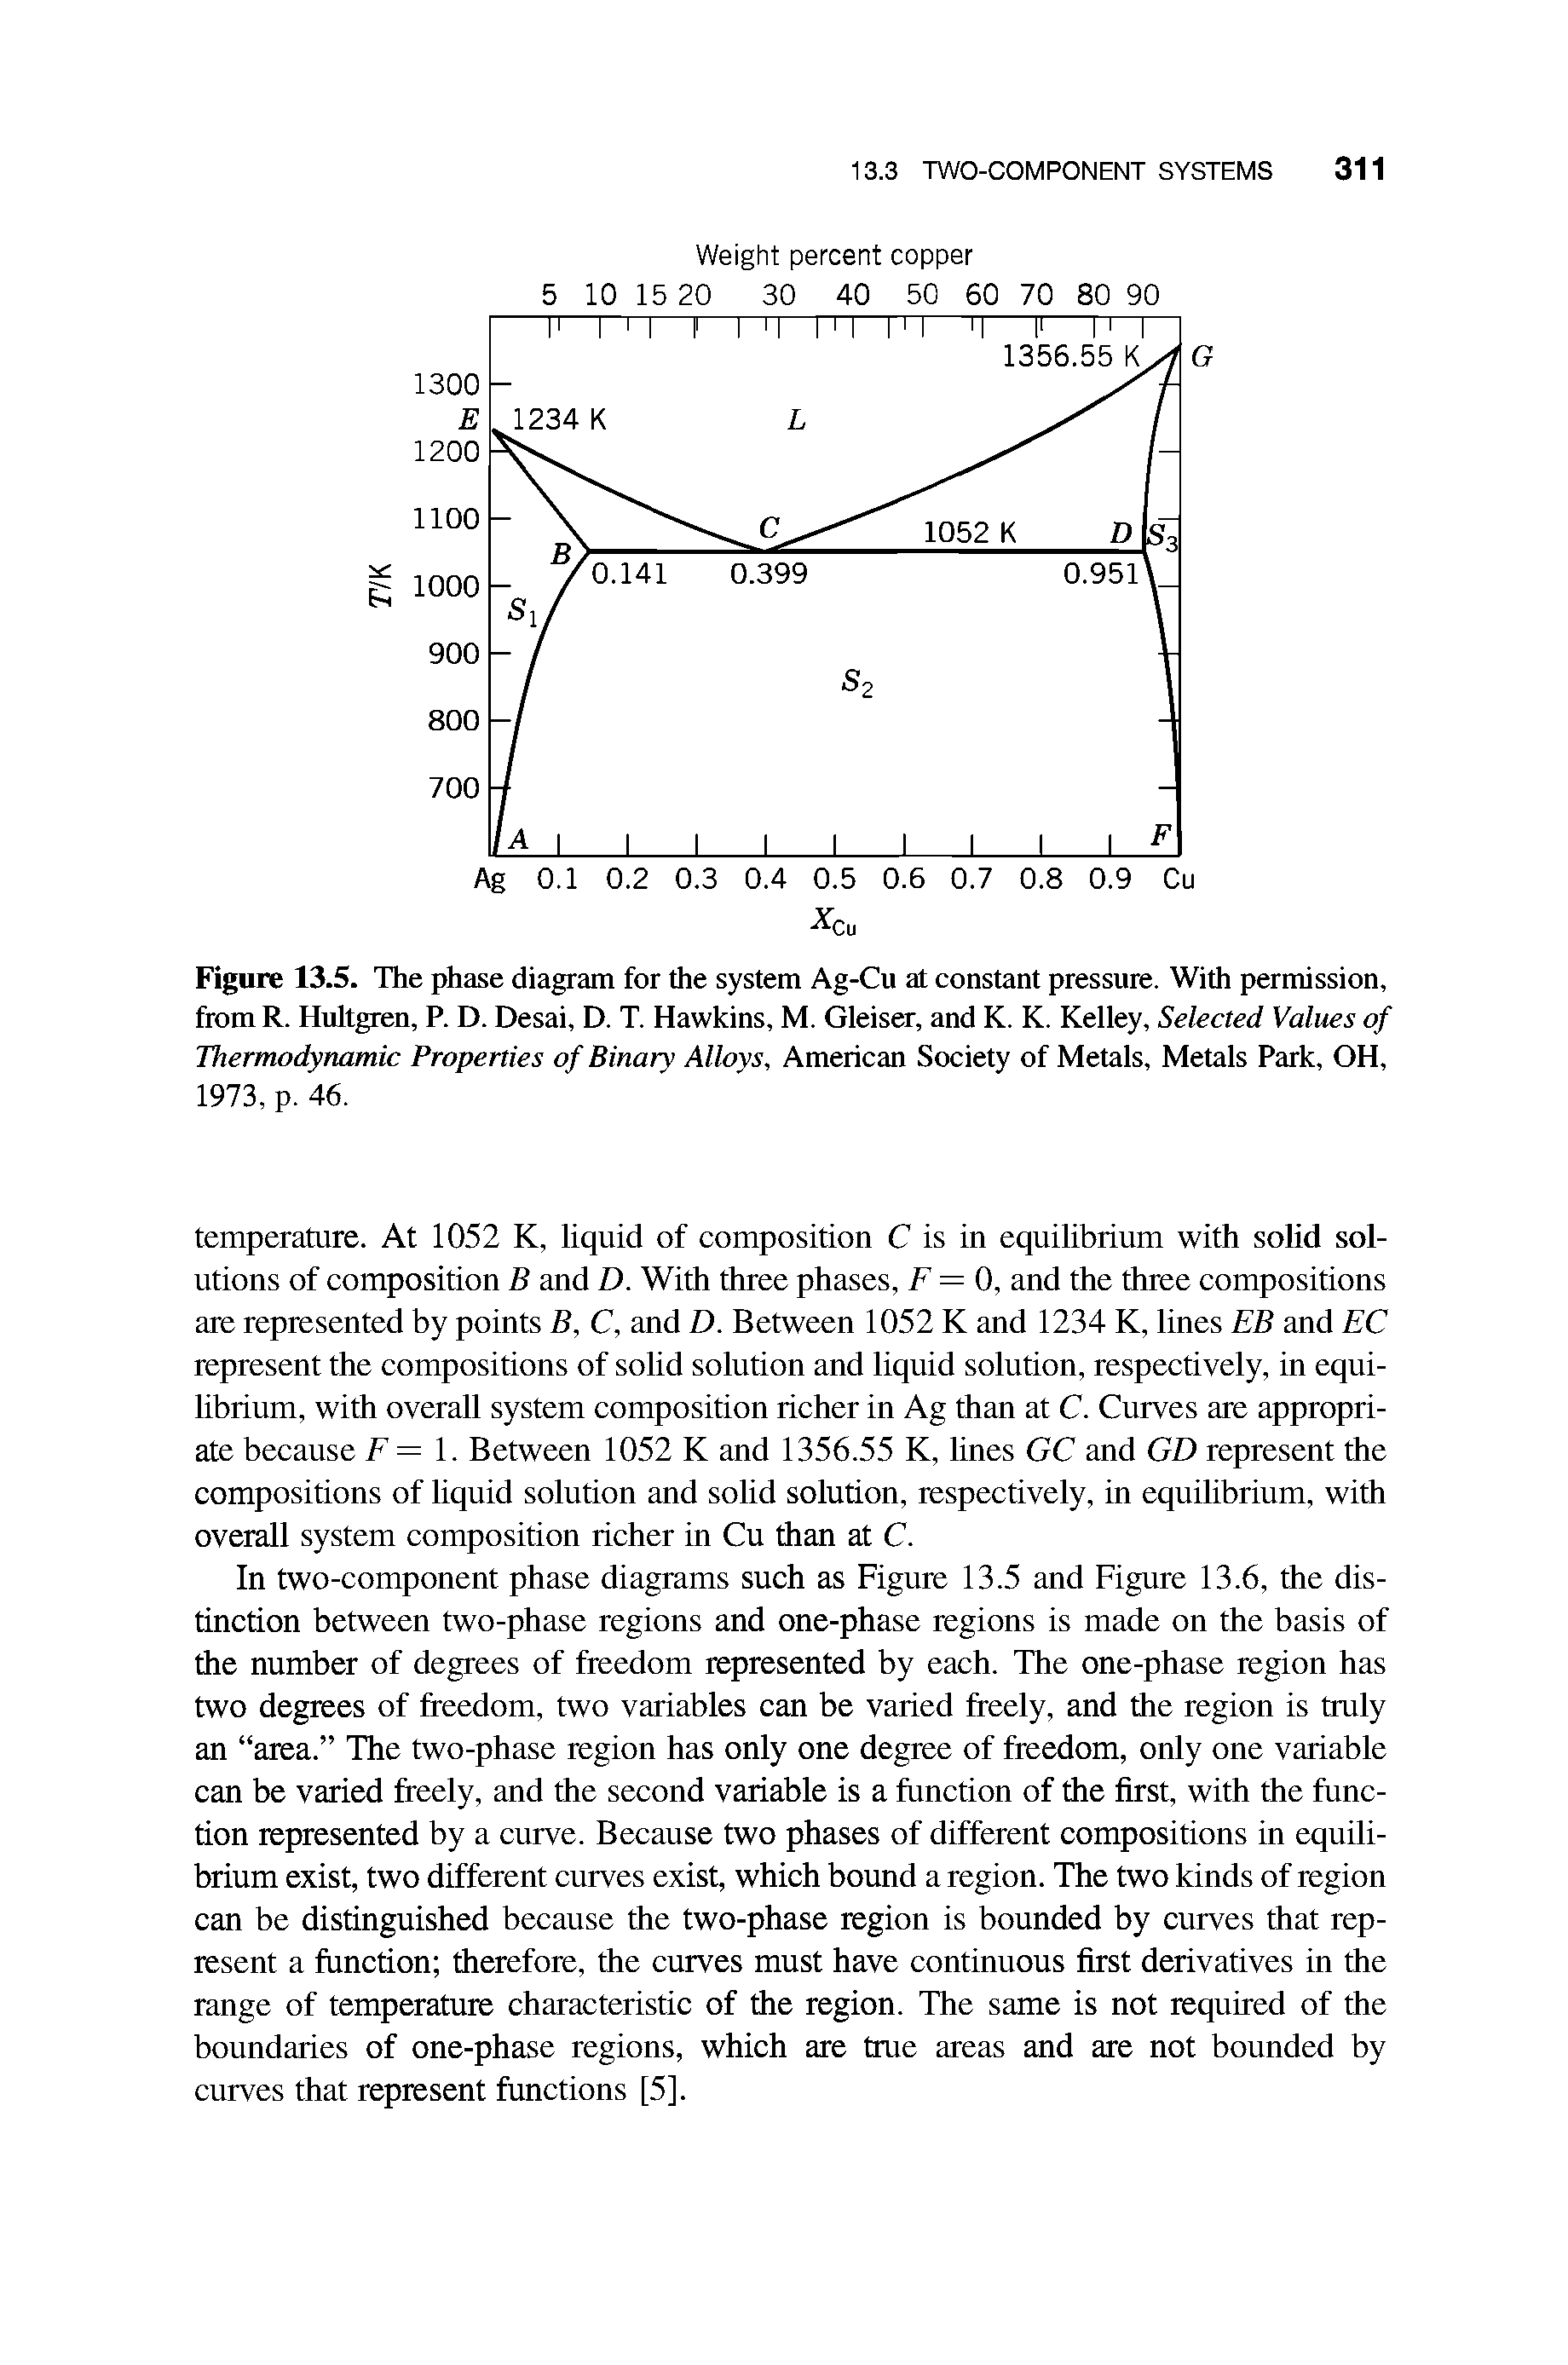 Figure 13.5. The phase diagram for the system Ag-Cu at constant pressure. With permission, from R. Hultgren, R D. Desai, D. T. Hawkins, M. Gleiser, and K. K. Kelley, Selected Values of Thermodynamic Properties of Binary Alloys, American Society of Metals, Metals Park, OH, 1973, p. 46.